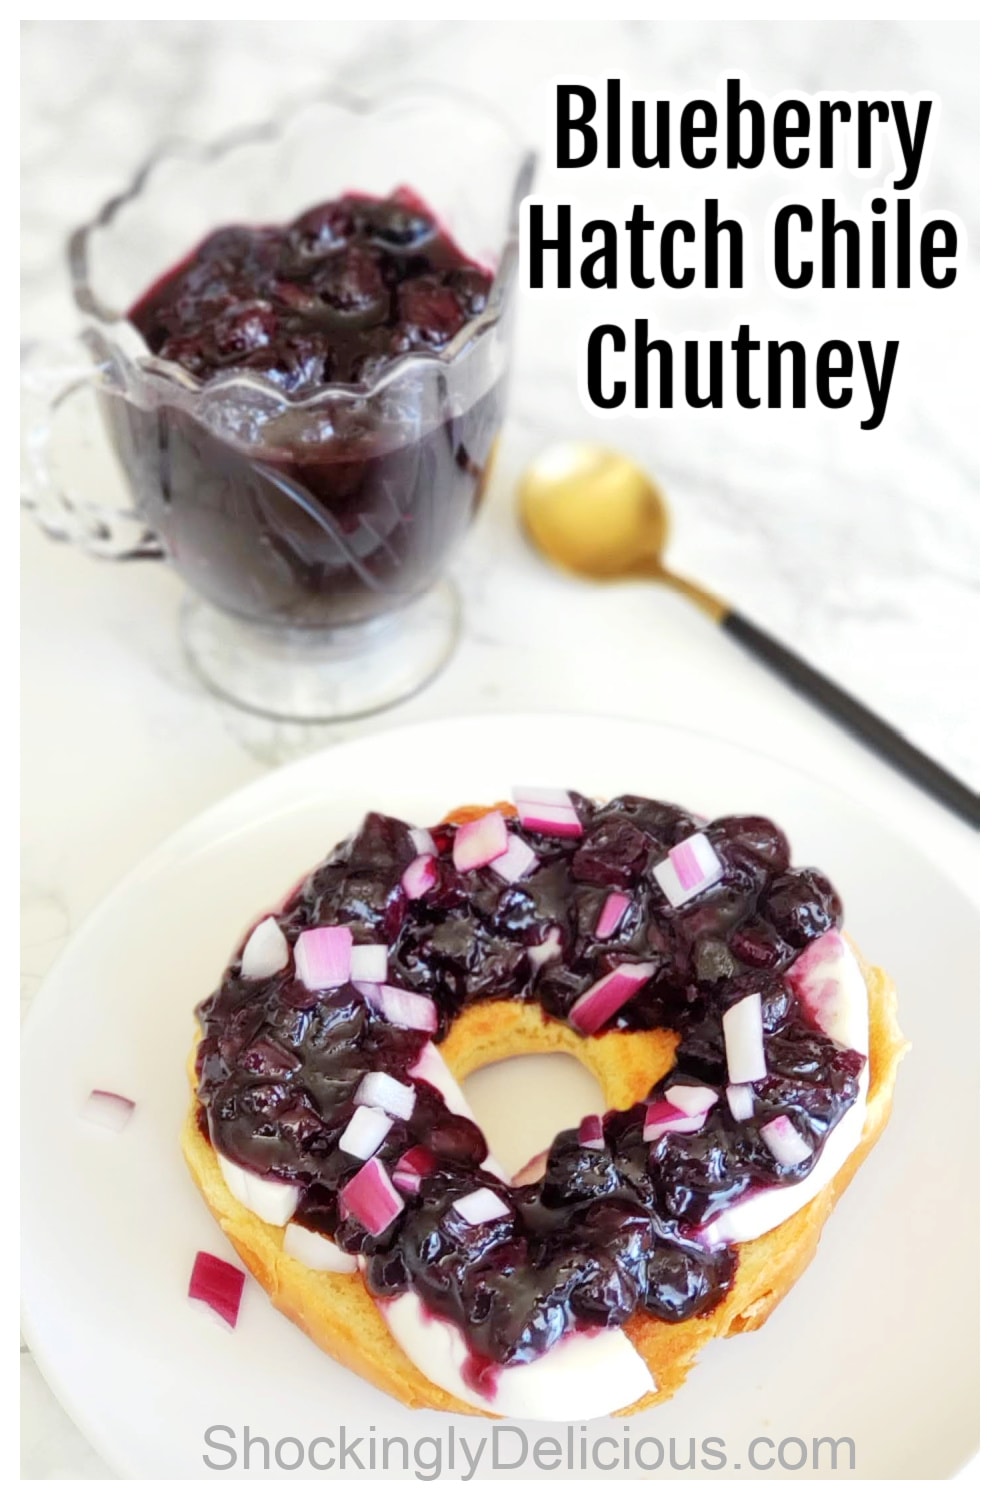 Blueberry Hatch Chile Chutney on a toasted bagel half with spoon and a glass pitcher of chutney in the background